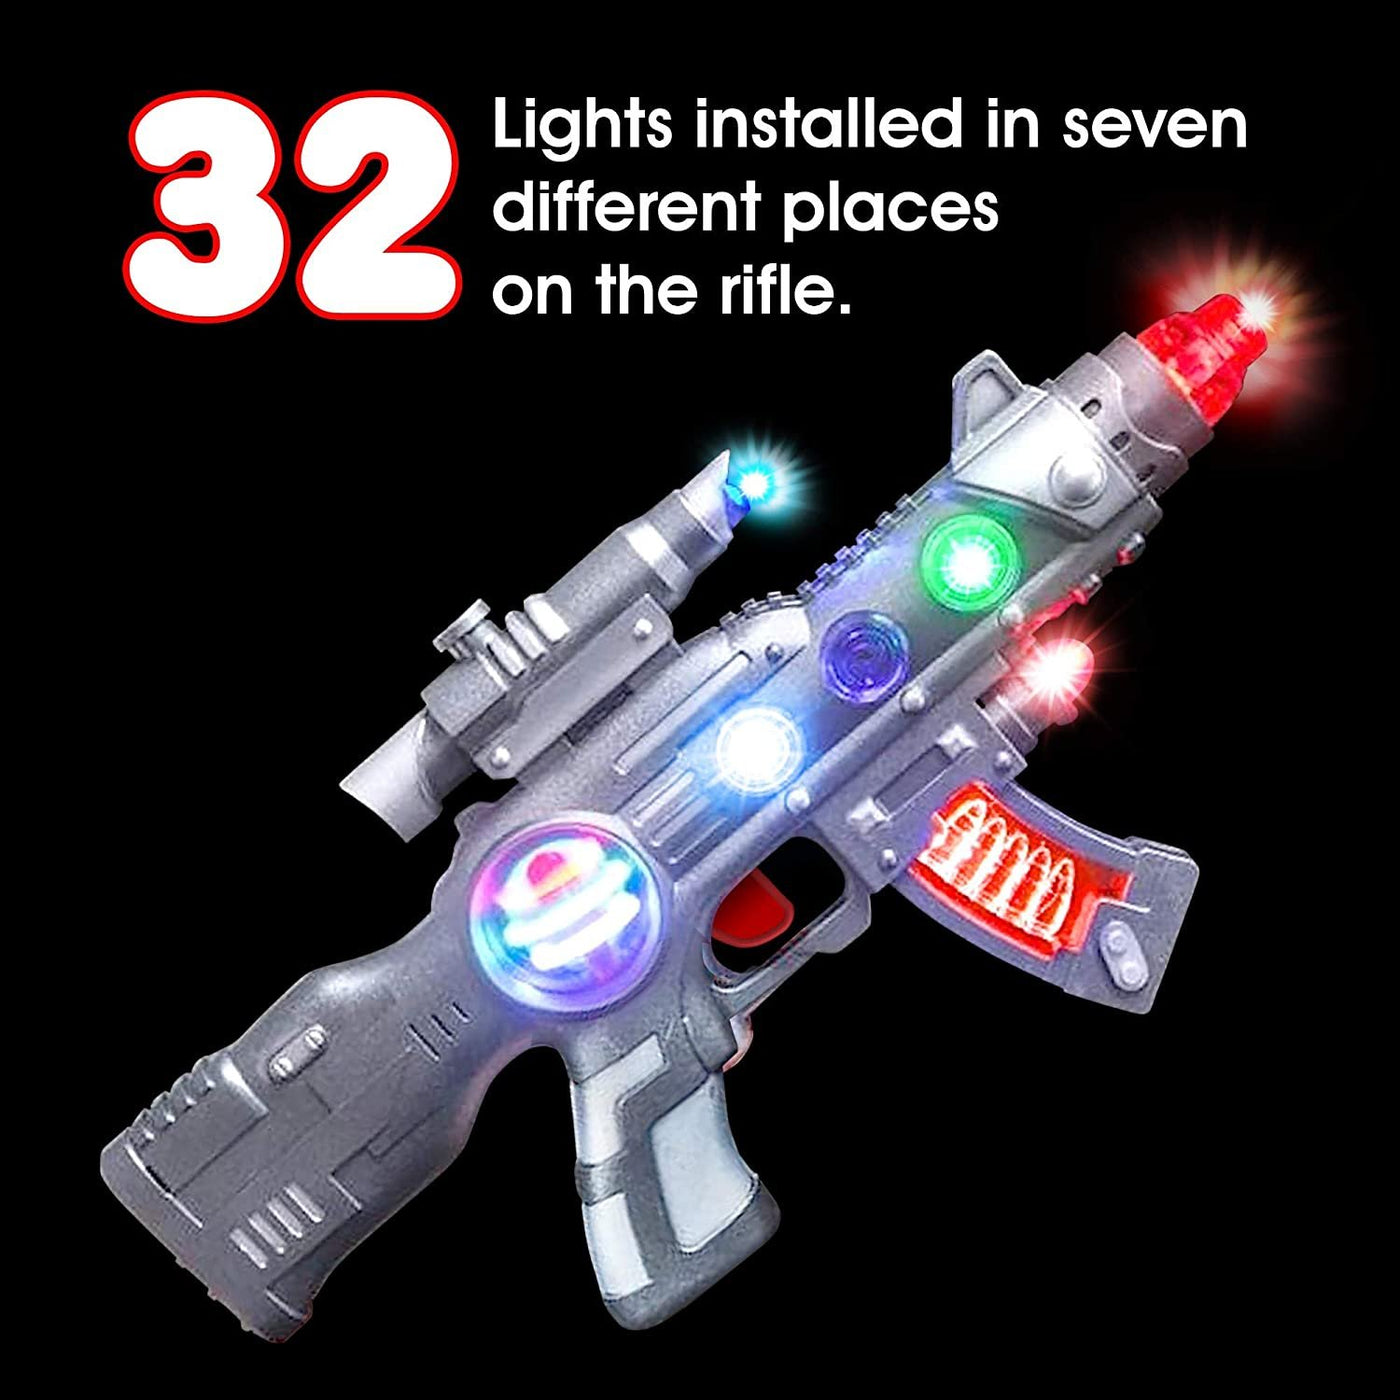 ArtCreativity Light Up Spin Ball Blaster Toy Gun, 12.5 Inch Assault Rifle with Thrilling Multicolor LEDs and Sound Effects, Batteries Included, Really Cool Play Gun for Boys and Girls, Great Gift Idea